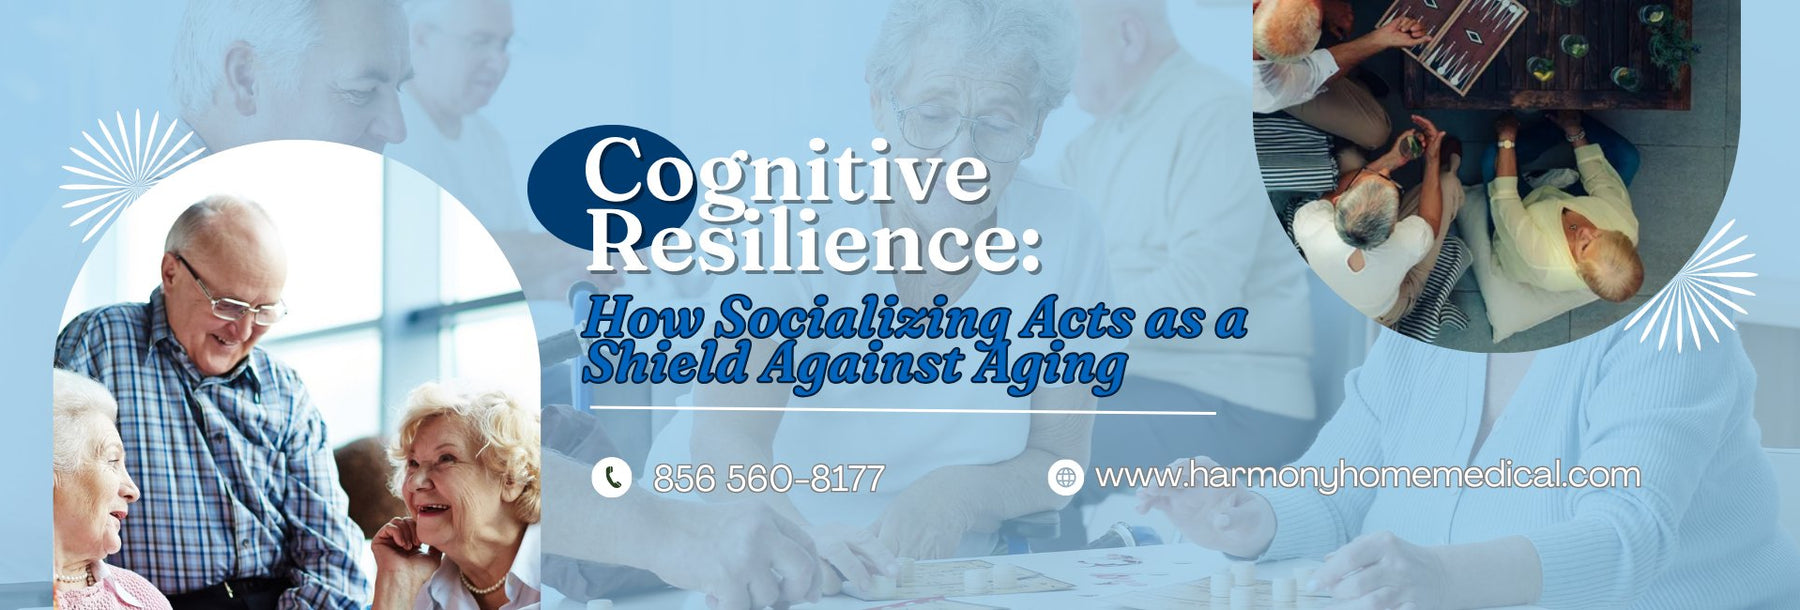 Cognitive Resilience: How Socializing Acts as a Shield Against Aging - Harmony Home Medical Supply